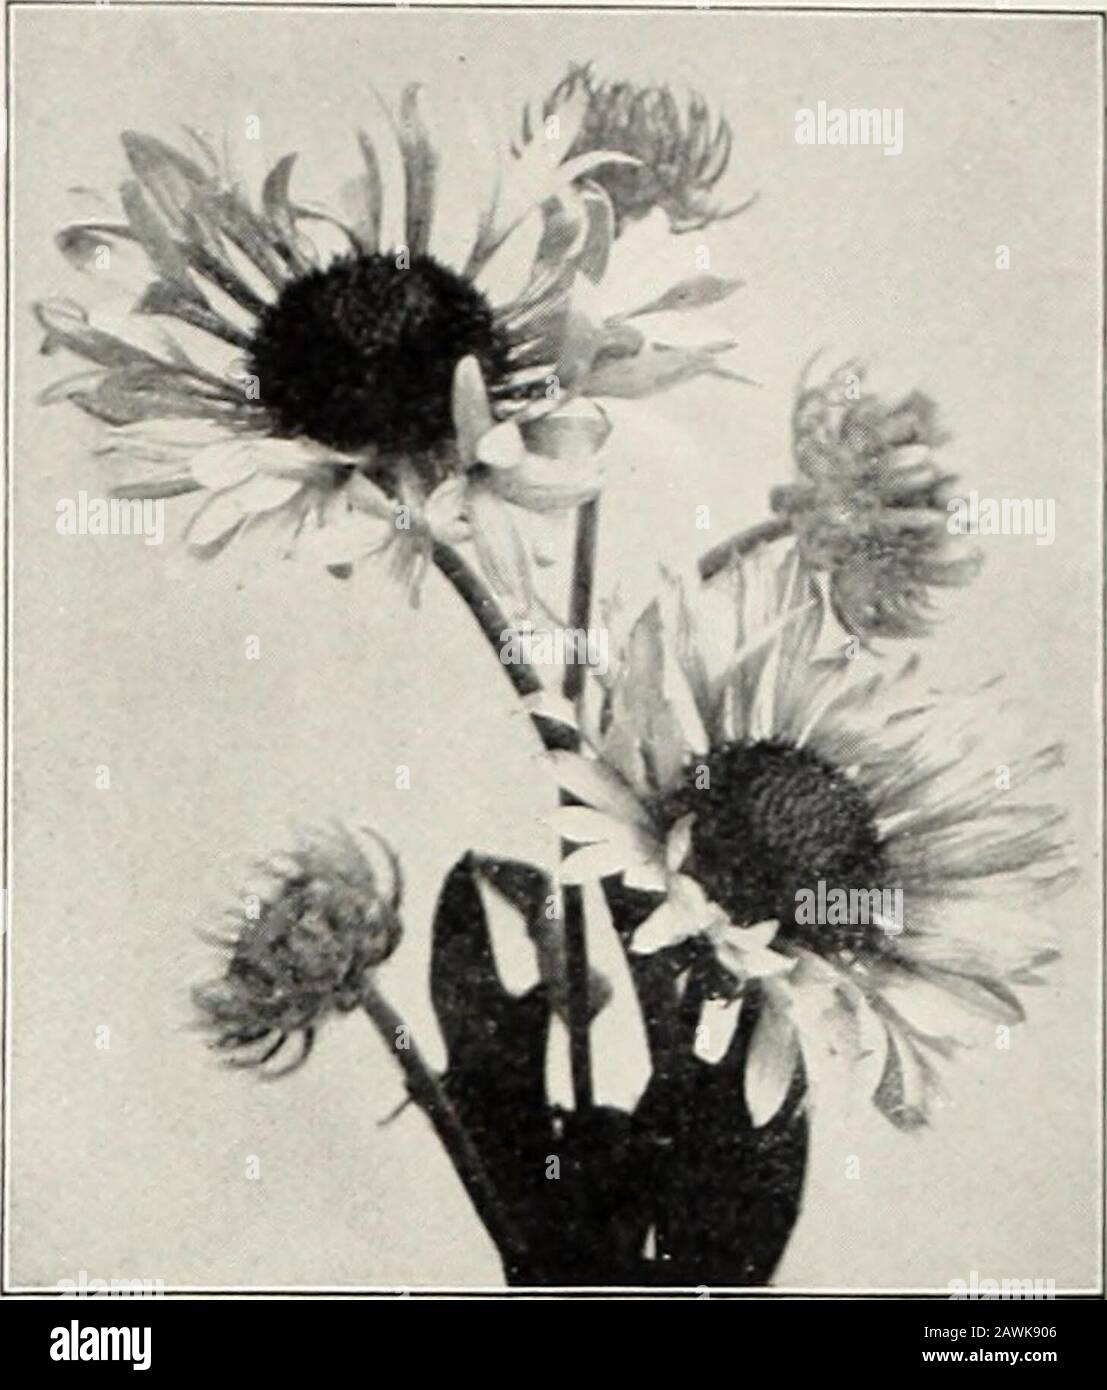 Rawson's bulb hand book / W.WRawson & Co. . Funkia undulata media variegata. Gaillardia grandiflora Hemerocallis flava (Day Lily). Bright yellow flowersduring May and June. 2ft. 15c. each. Si.50 per doz. HEUCHERA sanguinea. Small, scarlet flowers inlarge, graceful panicles. One of the best of thescarlet perennials. 18 inches. June to October. 20cts. each, $2 per doz.Brizoides. .-X most charming variety with handsomefoliage and red flowers. iRemains in flower fromspring to September. Superb for cutting. 25 cts.each, $2.50 per doz. HIBISCUS, Crimson Eye. Large showy white flow-ers, u itli a crim Stock Photo